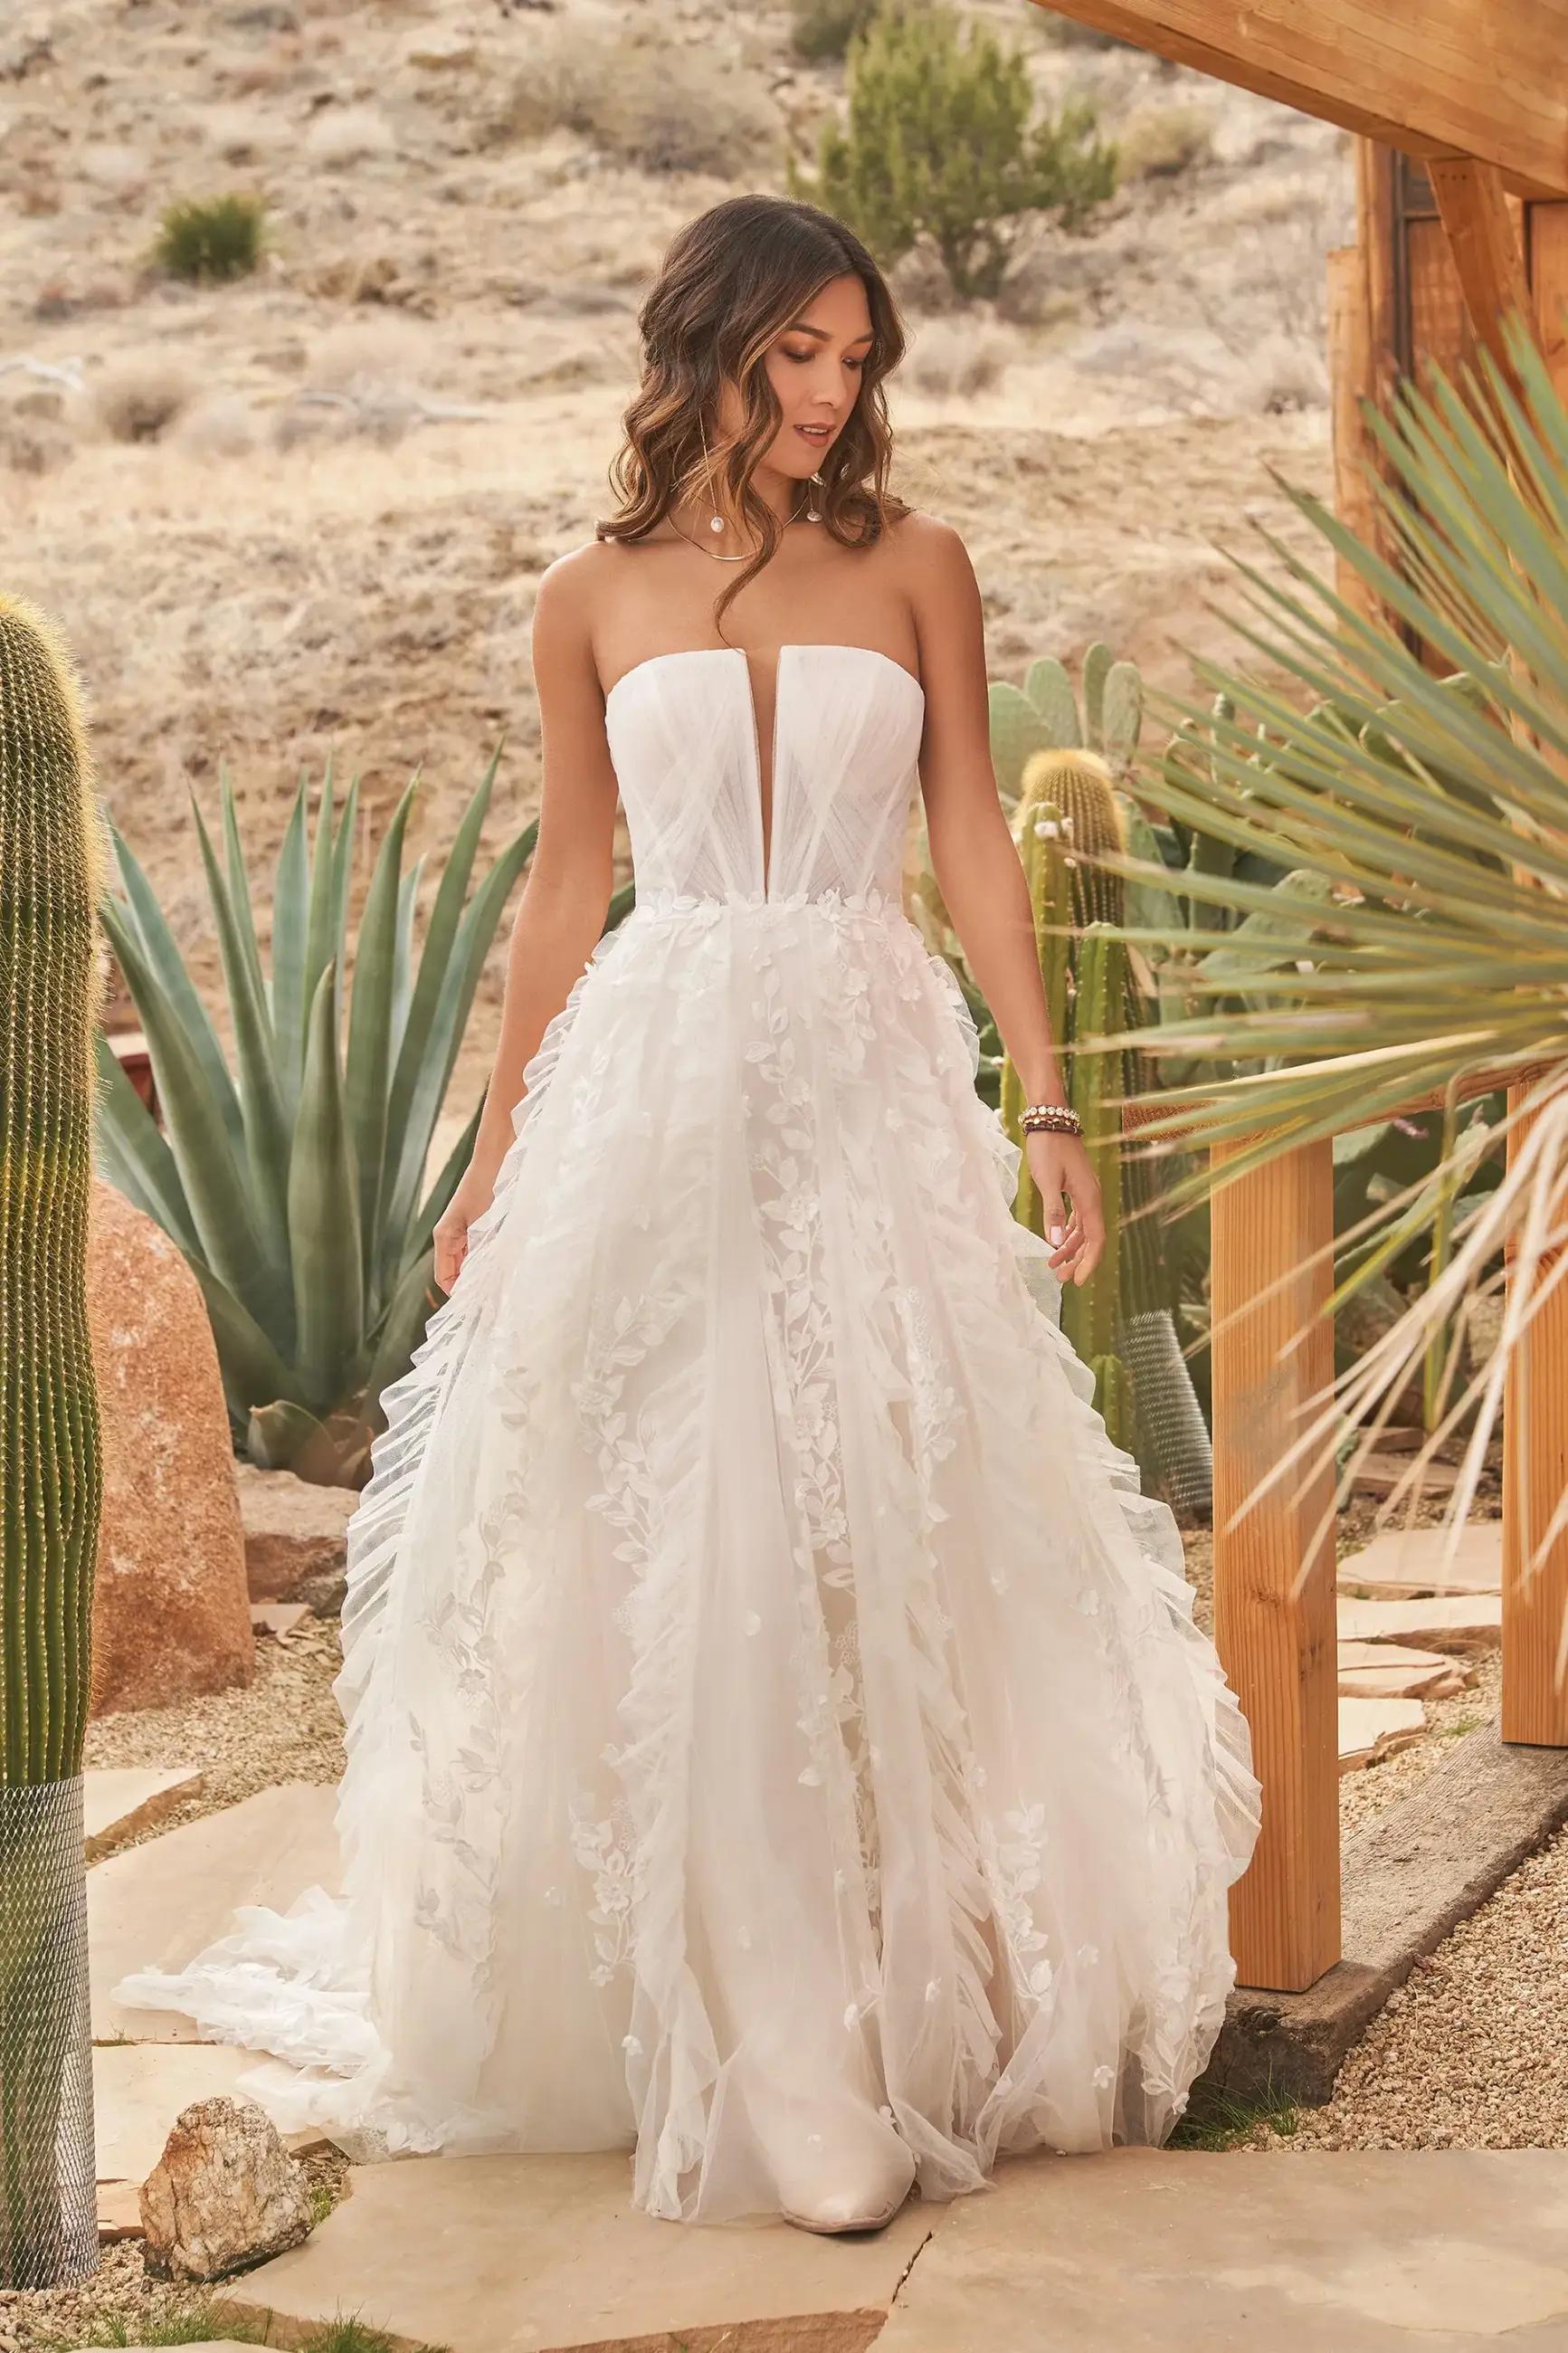 Unique and Timeless Strapless Wedding Dresses Image